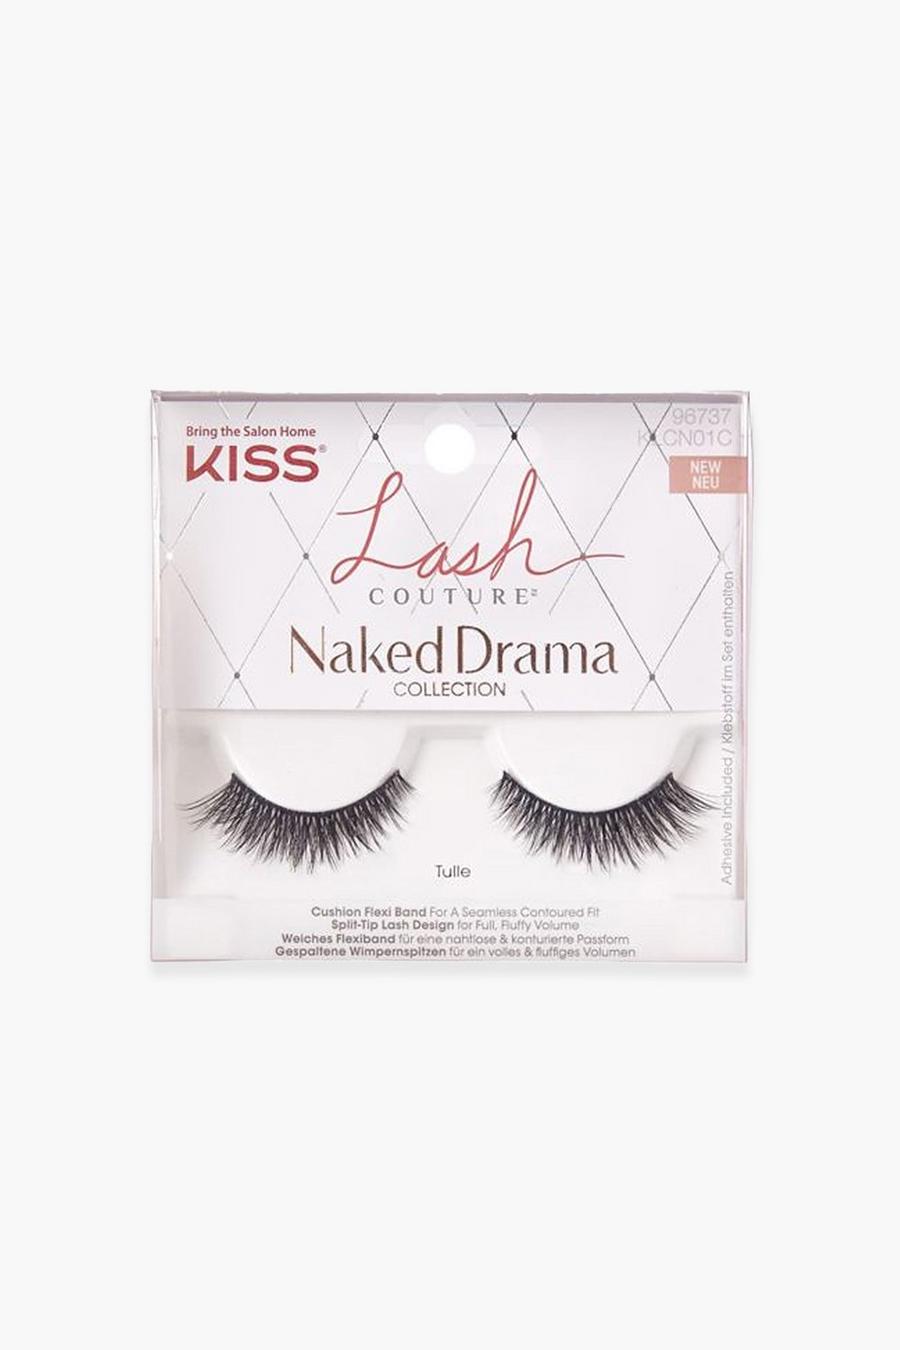 Kiss - Faux cils Lash Couture - Naked Drama - Tulle, Black image number 1